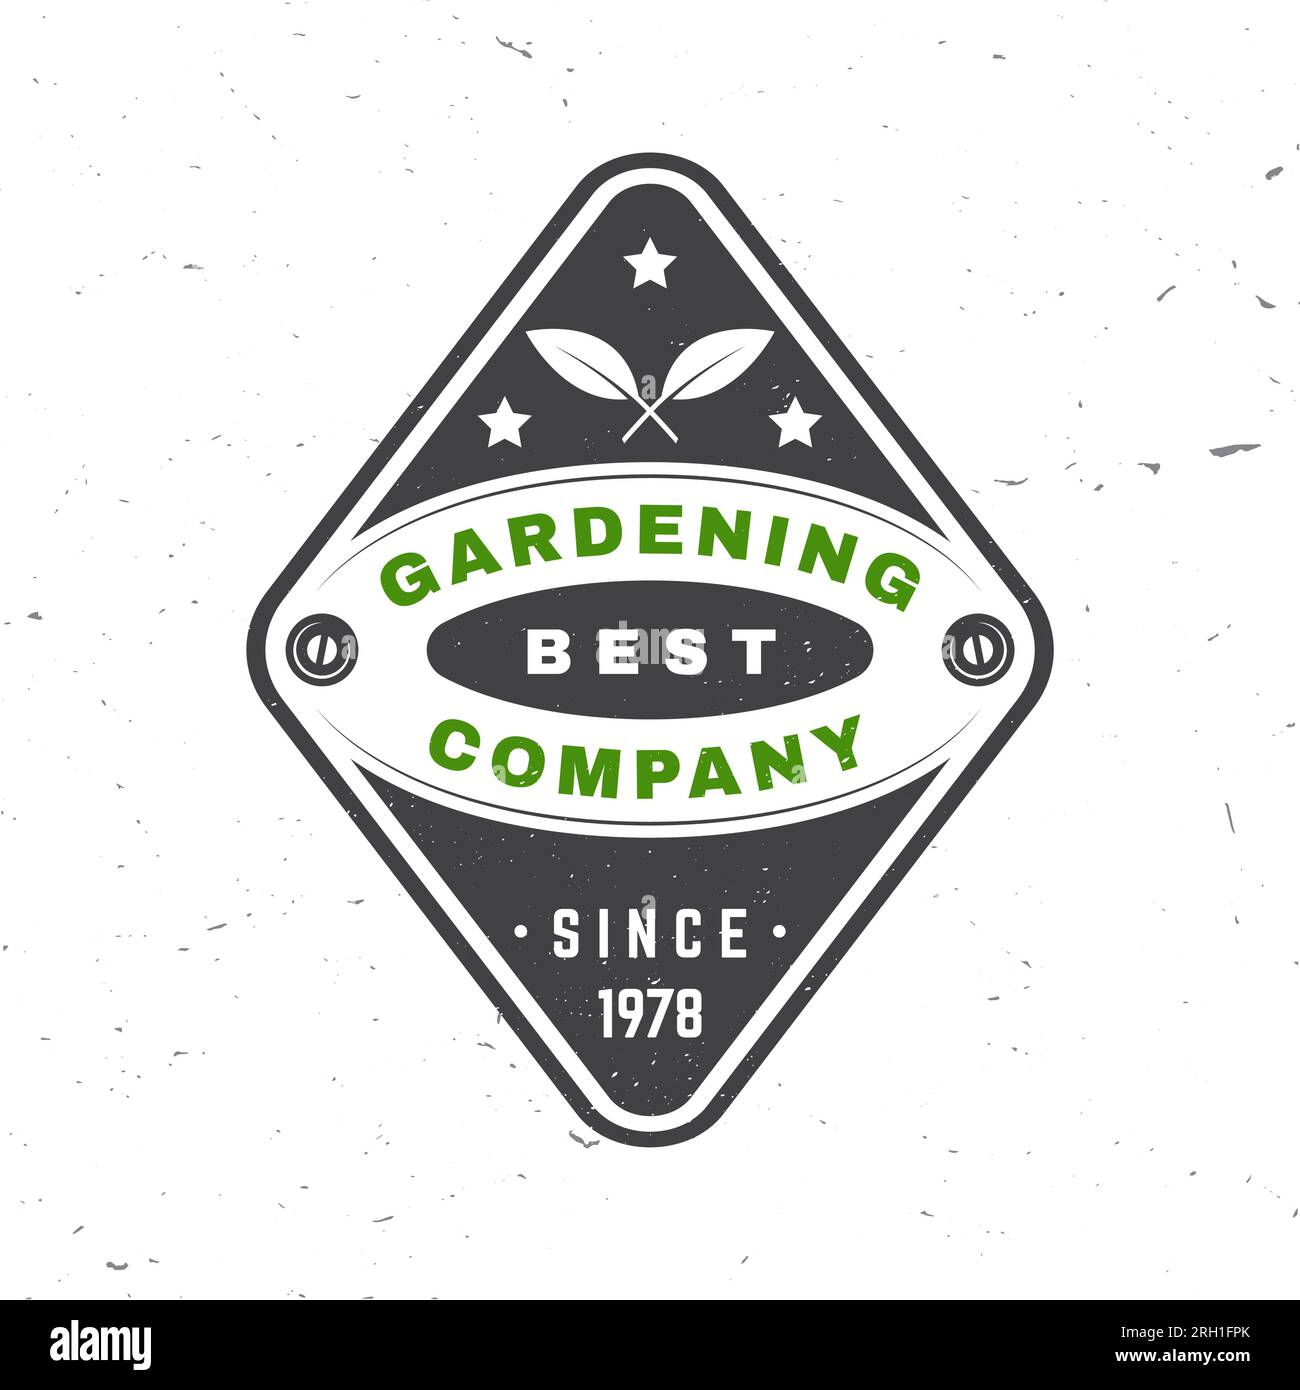 Gardening company emblem, label, badge, logo. Vector illustration. For sign, patch, shirt design with garden seedlings silhouette. Monochrome style. Stock Vector